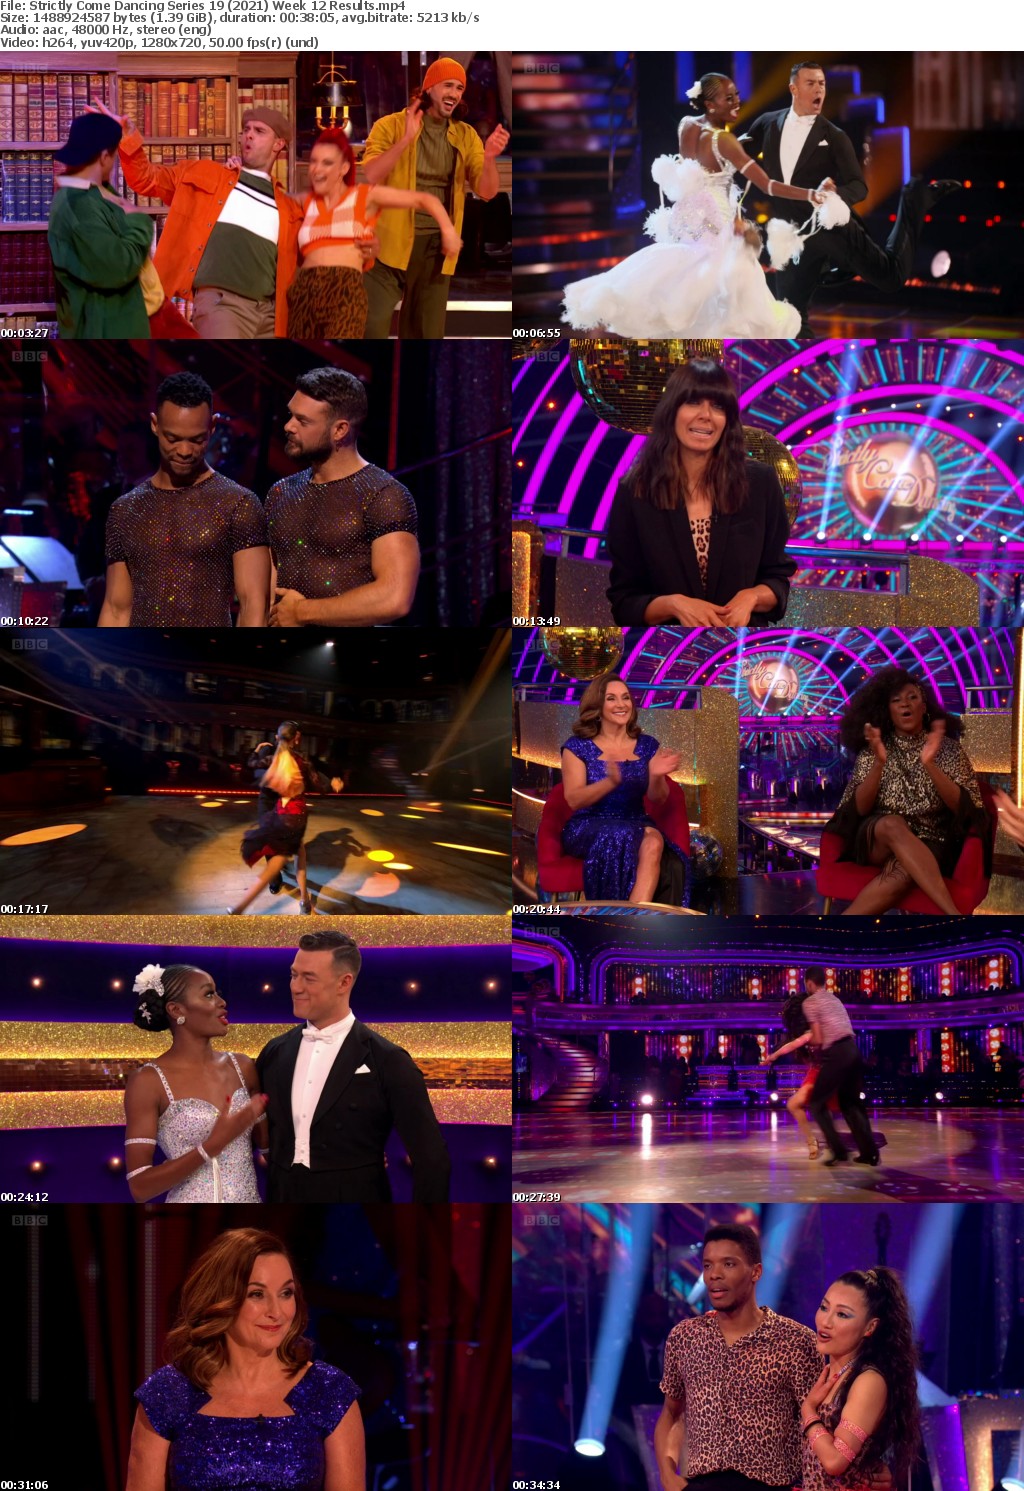 Strictly Come Dancing Series 19 (2021) Week 12 Results (1280x720p HD, 50fps, soft Eng subs)